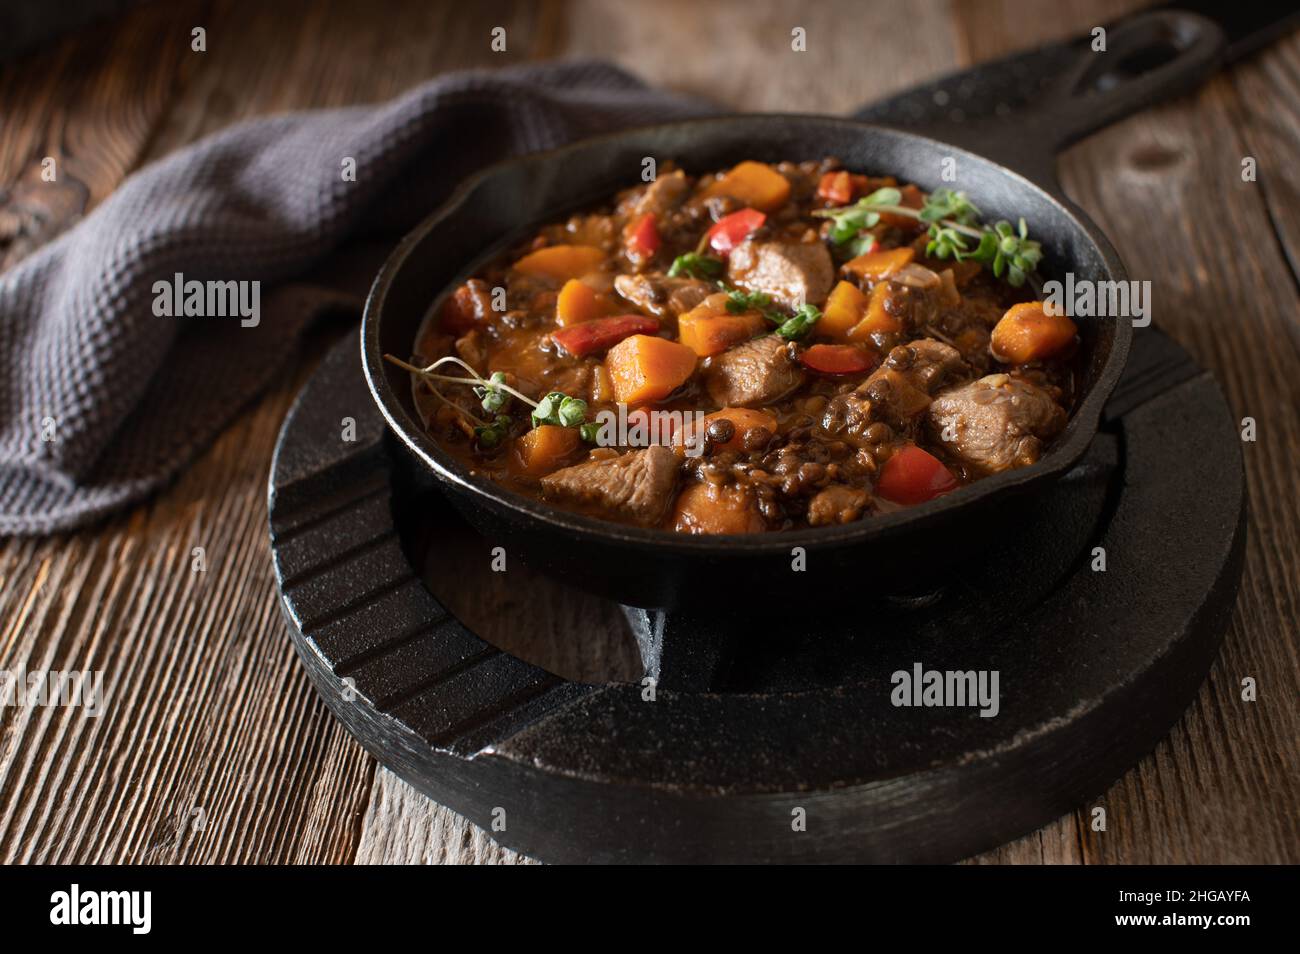 High protein fitness meal with a spicy chicken stew cooked with vegetables and lentils. Served in a rustic cast iron pan with weight plate Stock Photo